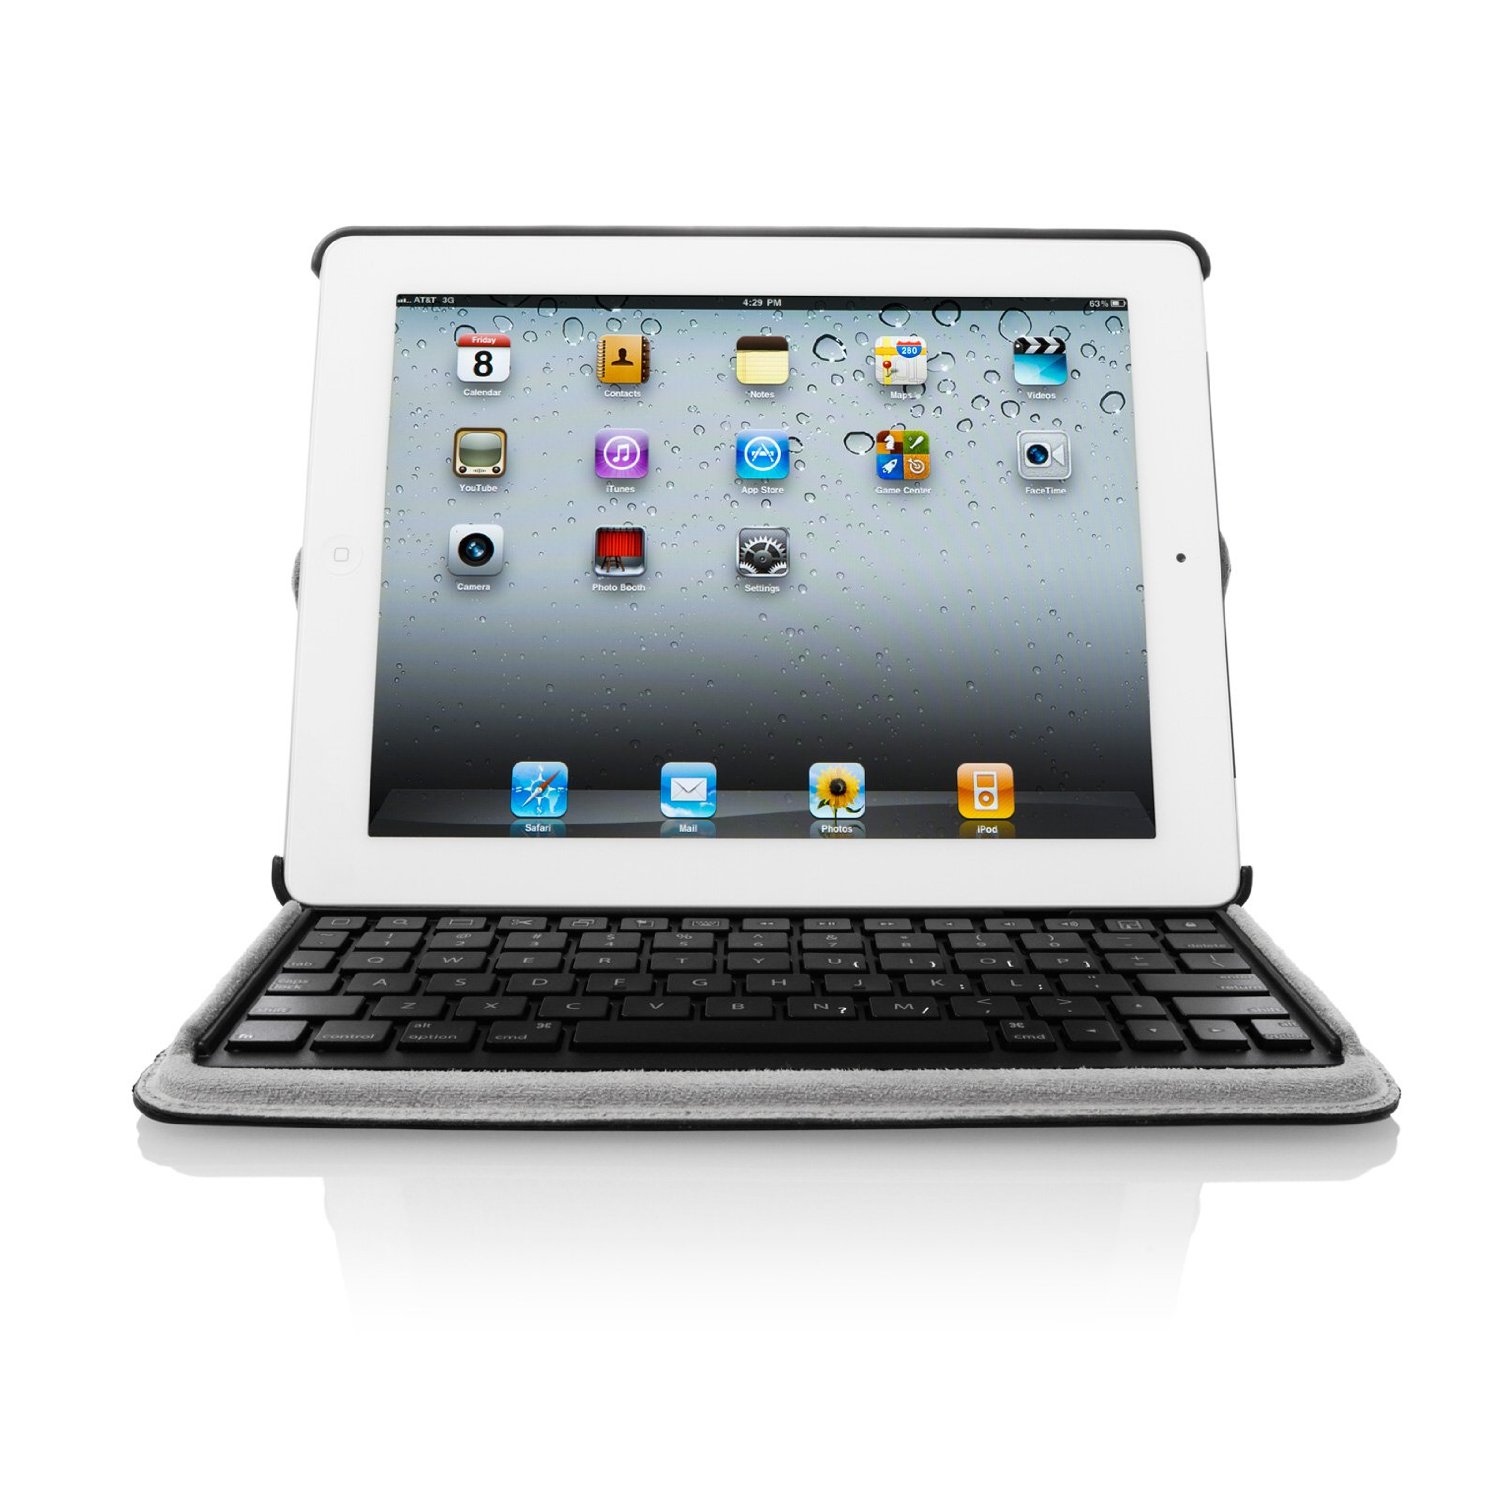 http://thetechjournal.com/wp-content/uploads/images/1108/1312709193-targus-versavu-case-and-keyboard-for-ipad-2-4.jpg